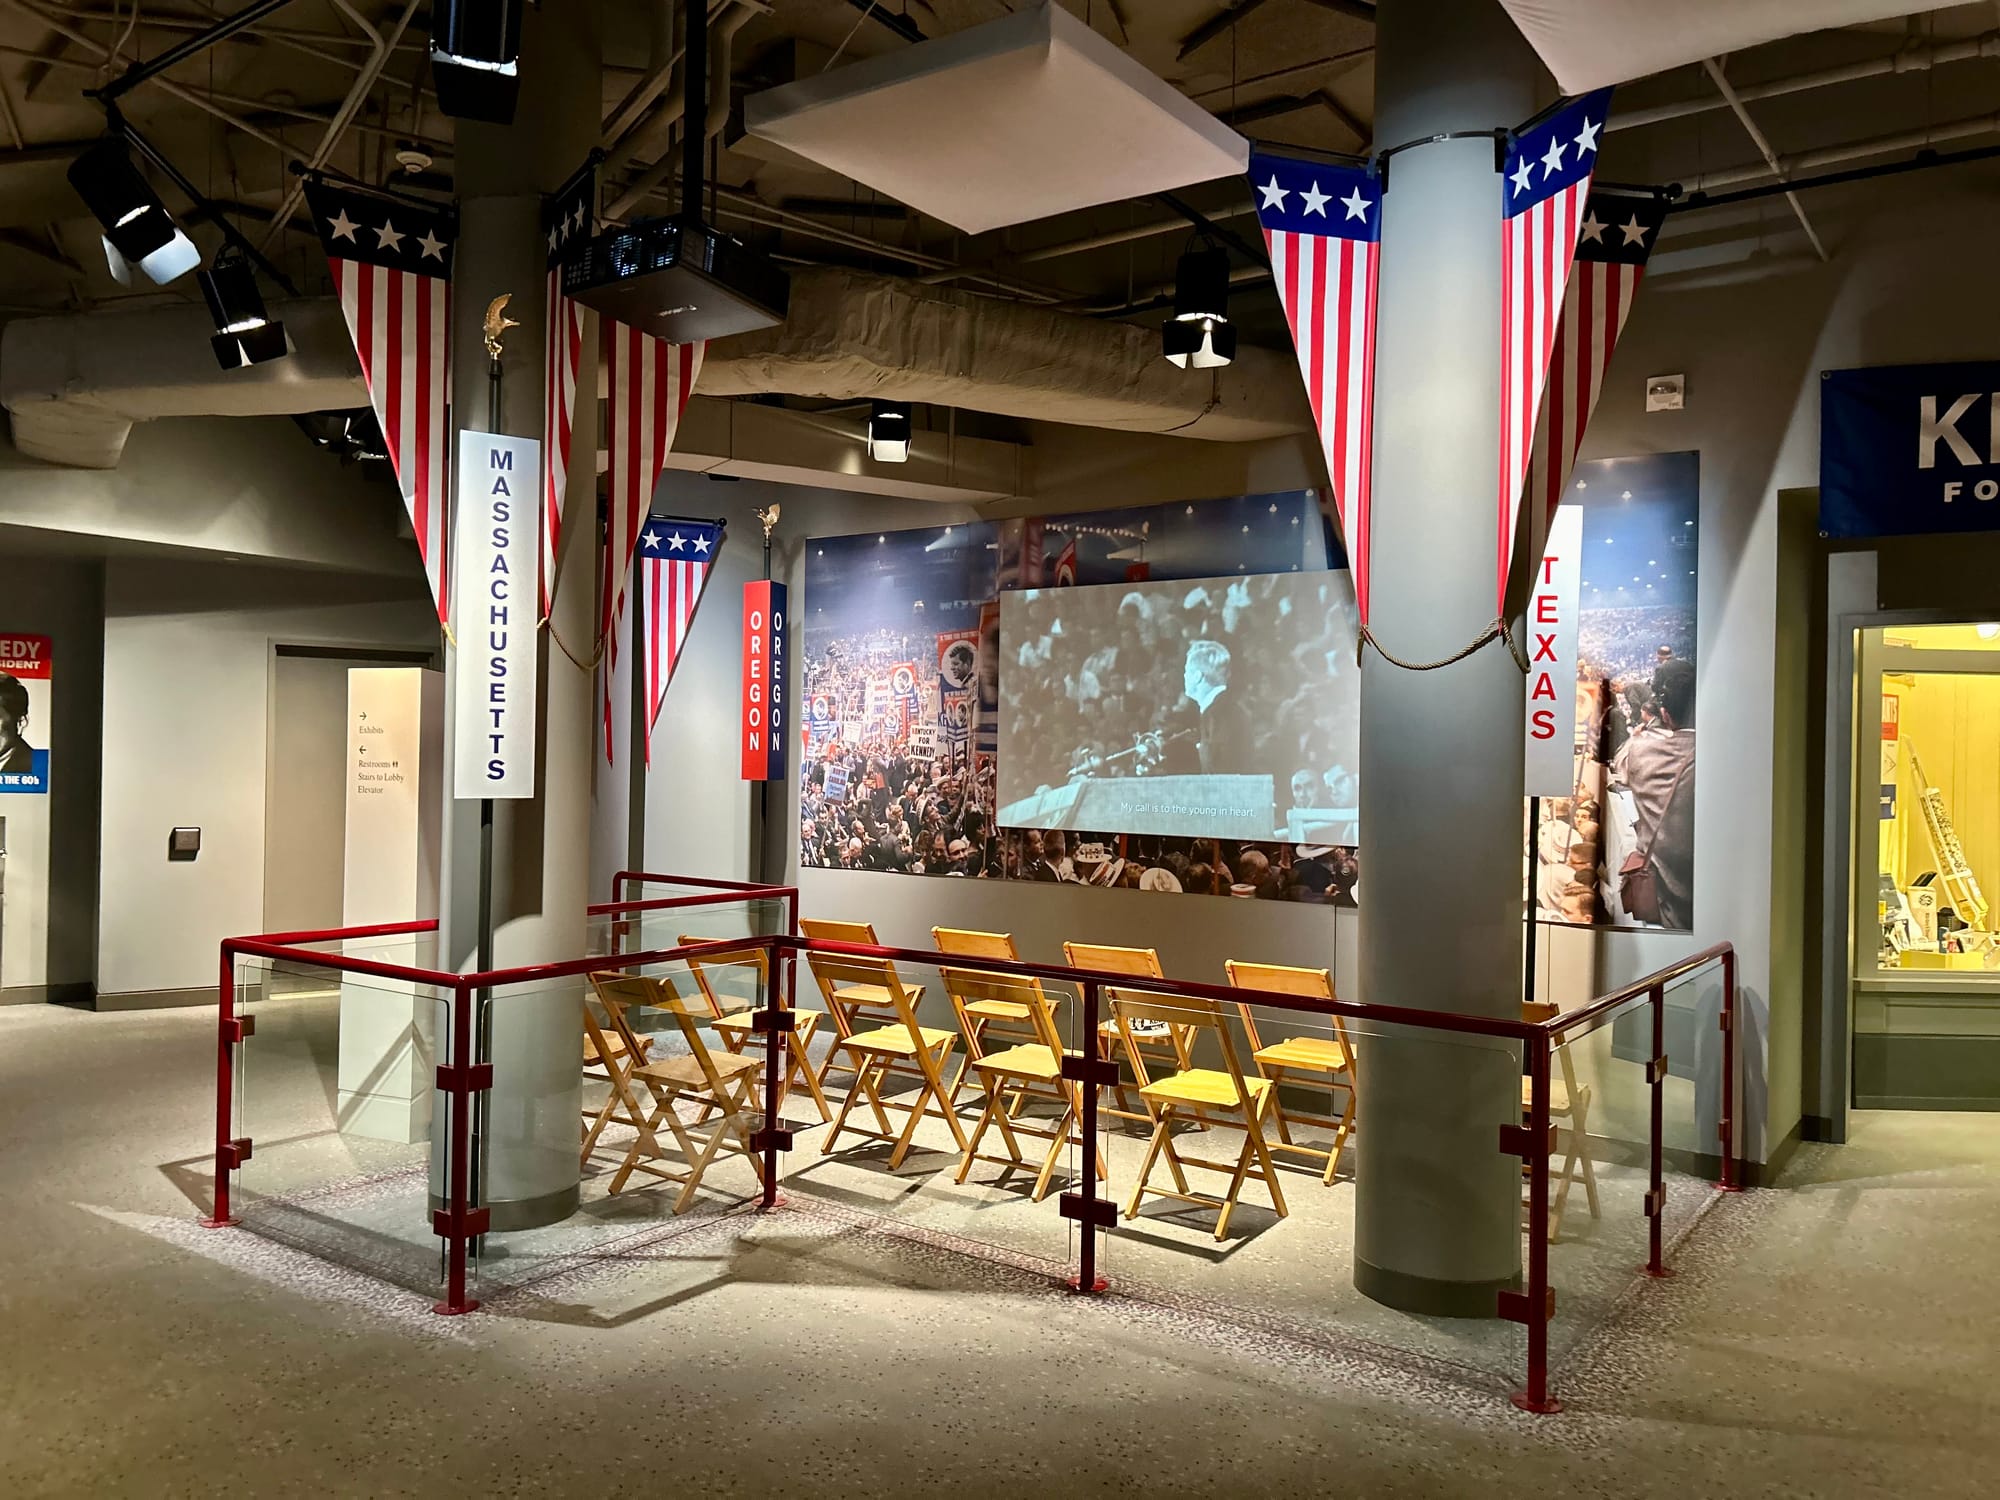 Day Trips: John F Kennedy Presidential Library and Museum